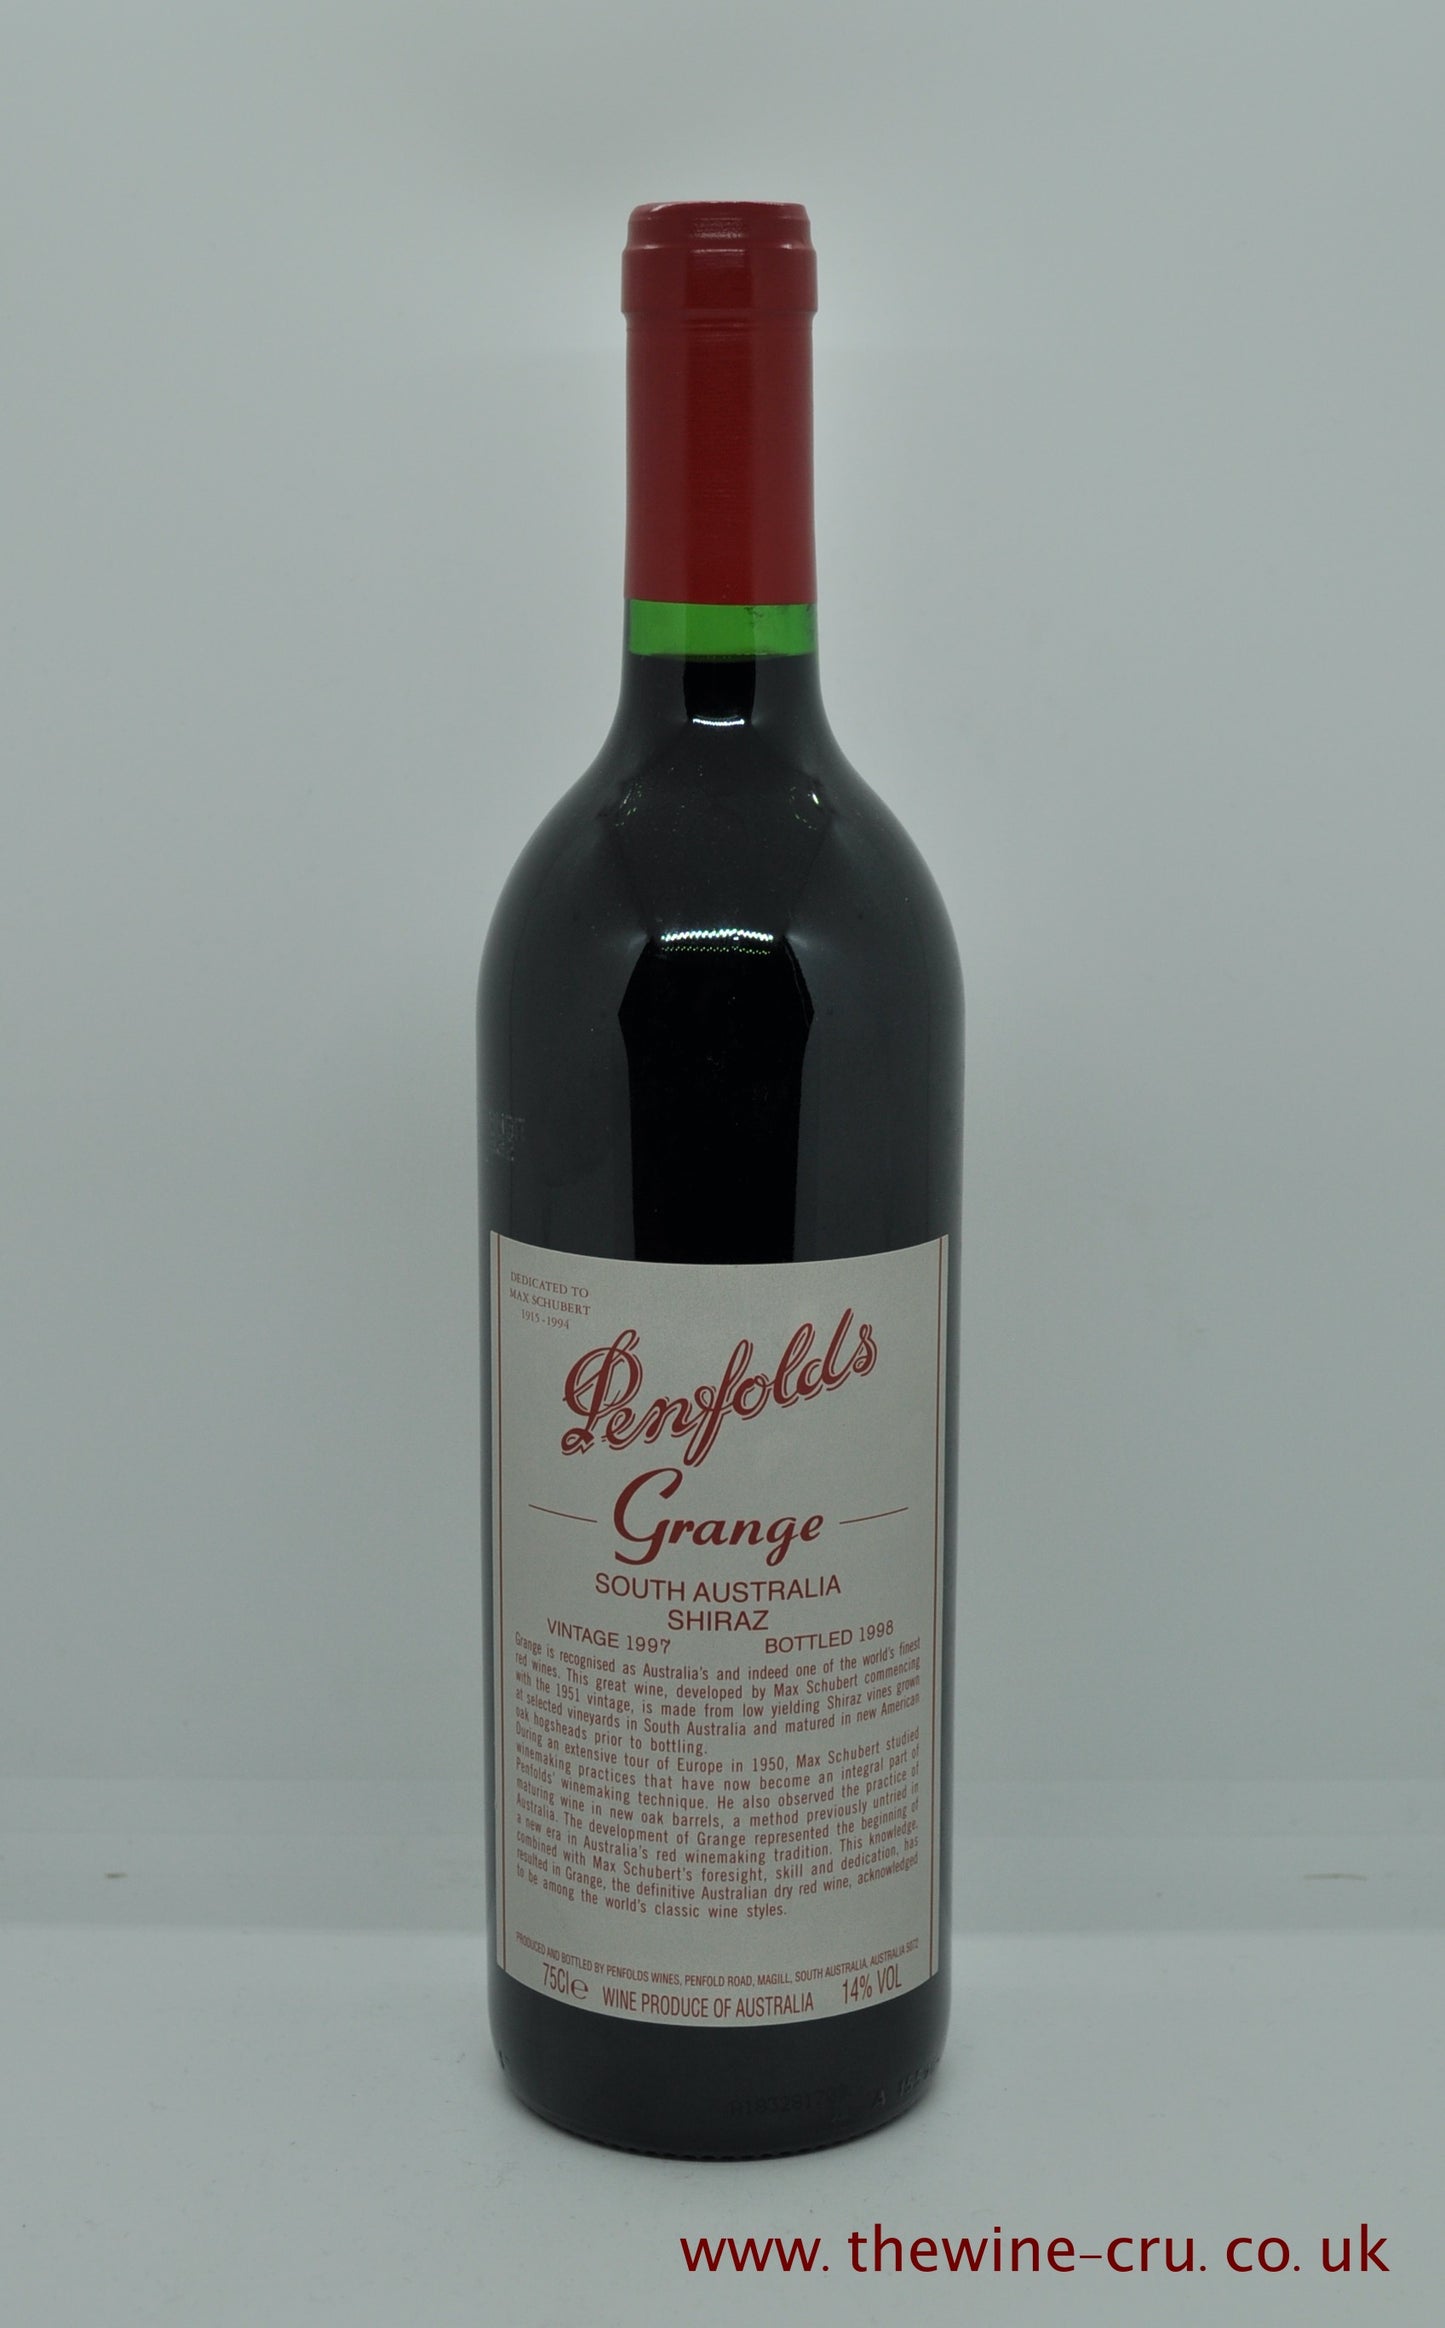 A bottle of 1997 vintage red wine. Penfold's Grange 1997. Australia. The bottle is in good condition with the wine level being in neck. Immediate delivery. Free local delivery. Gift wrapping available.